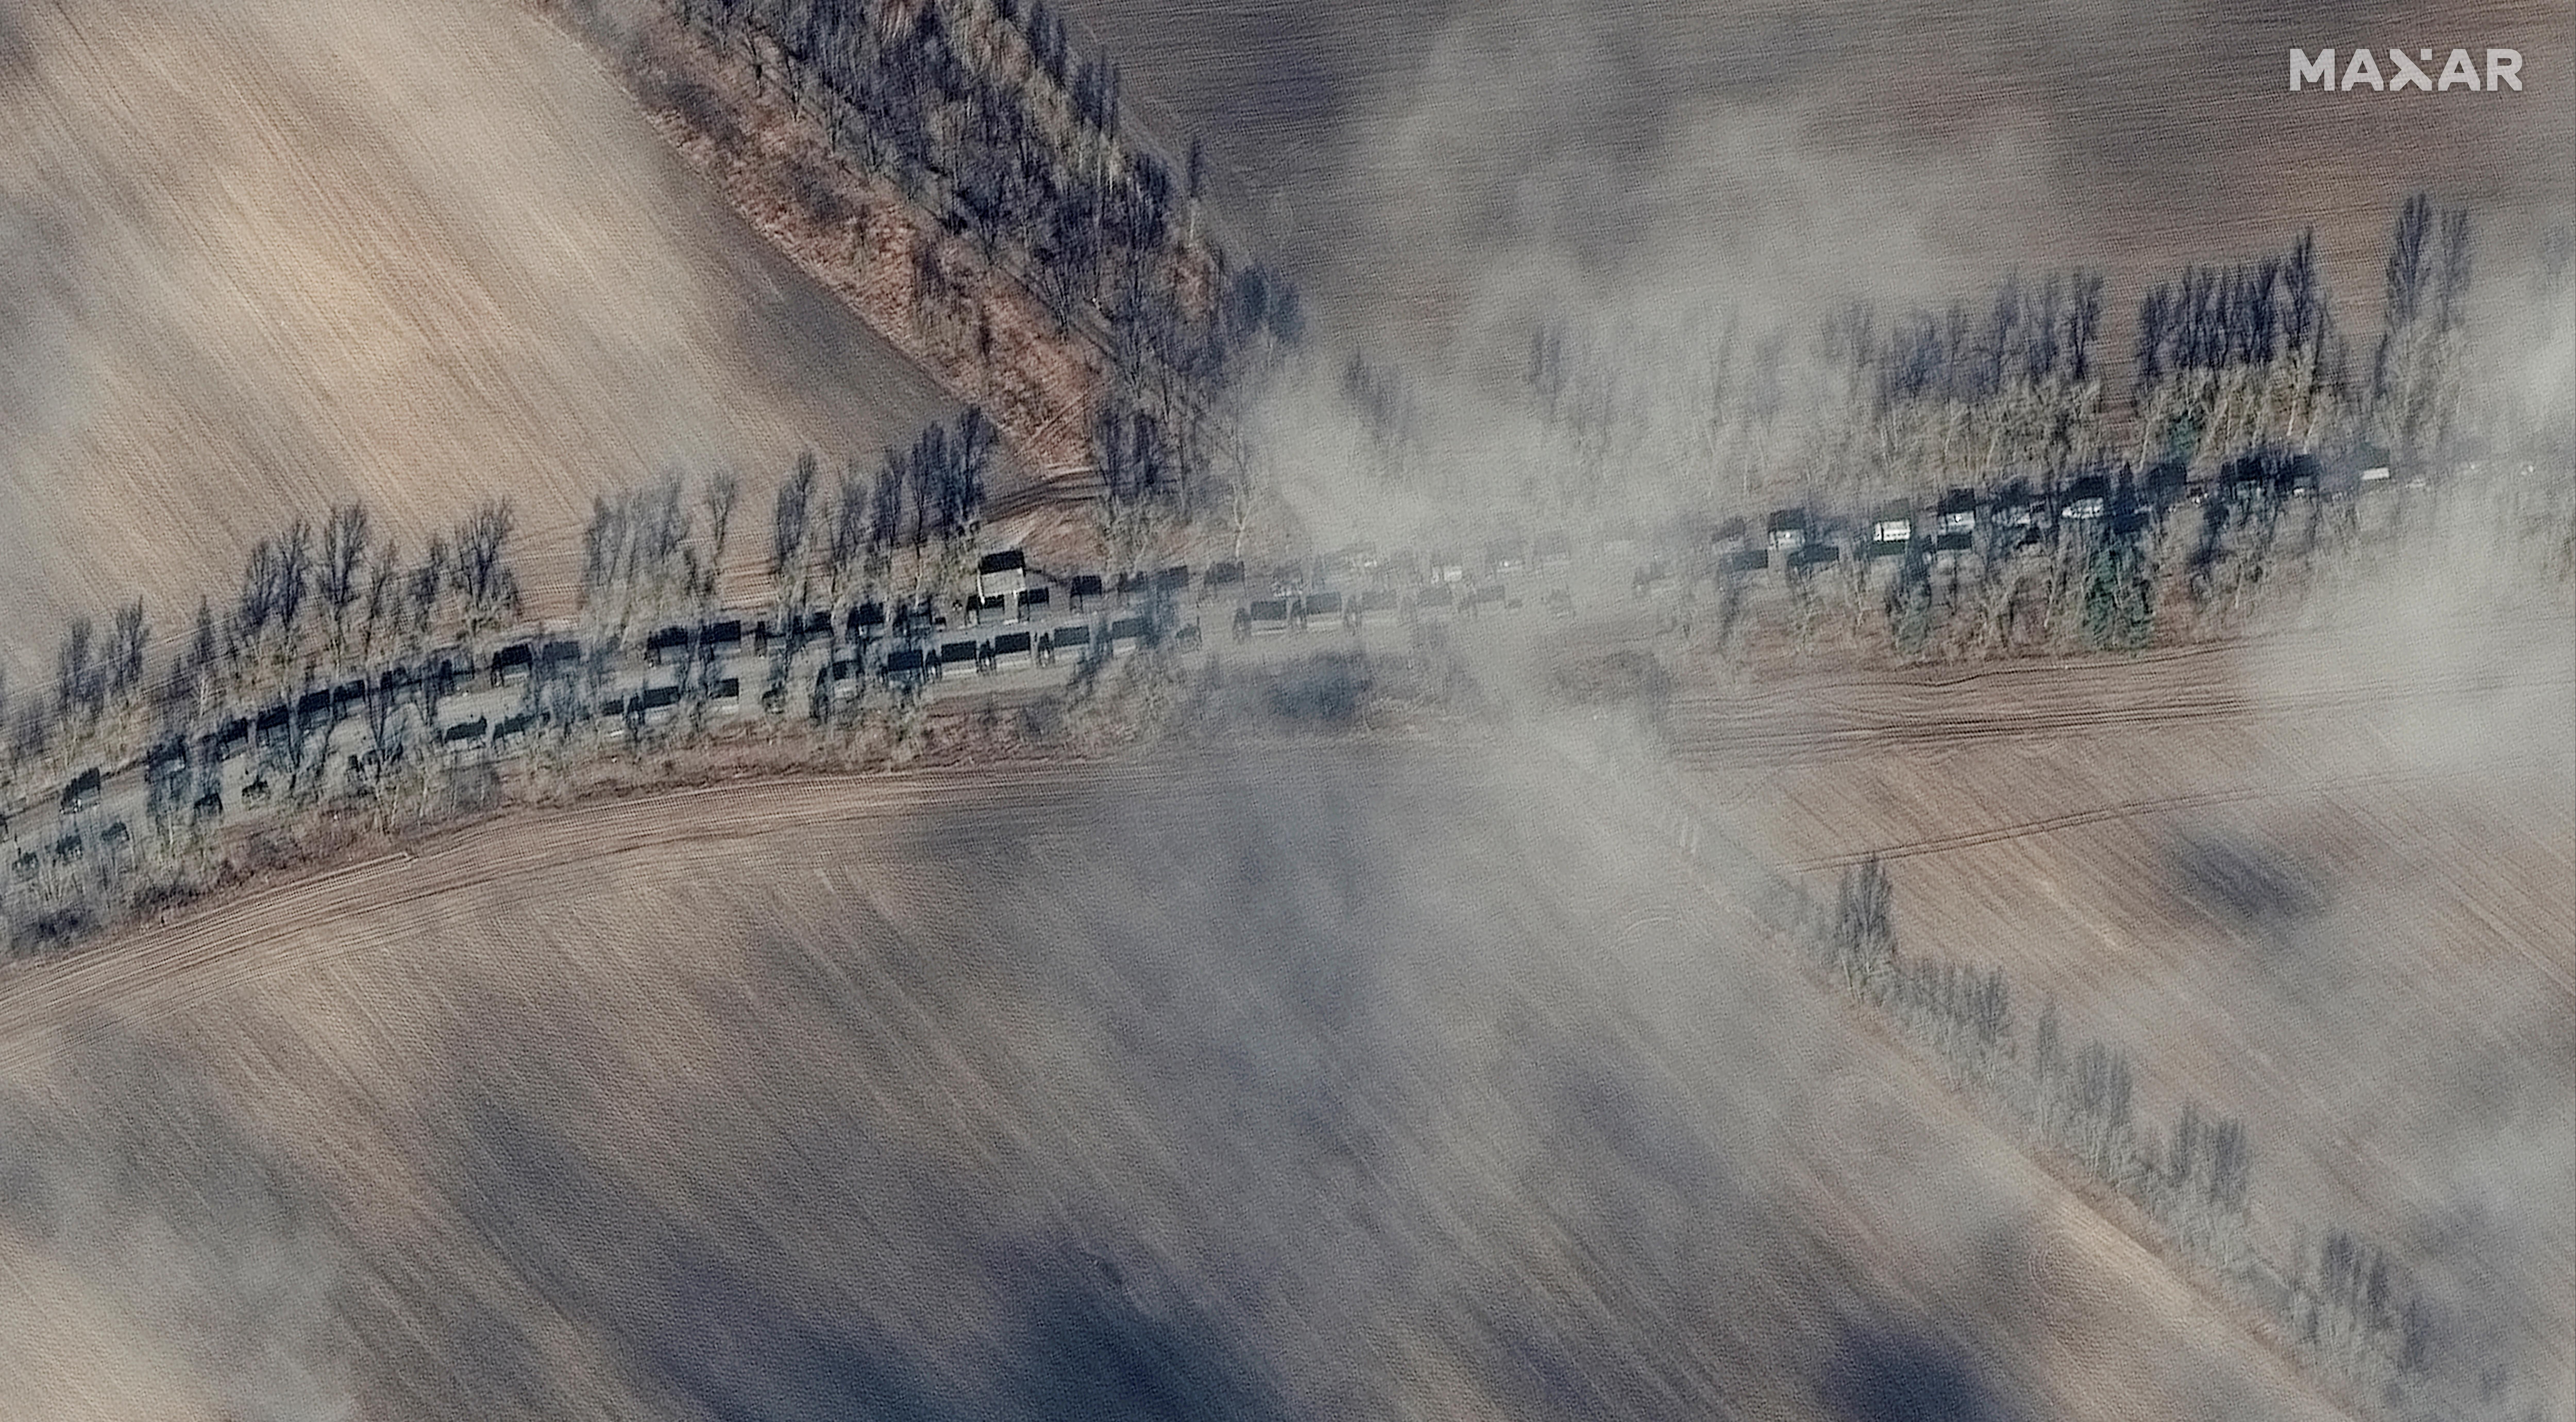 A satellite image shows Russian ground forces northeast of Ivankiv heading in the direction of Kyiv, Ukraine, February 27, 2022. Satellite image ©2022 Maxar Technologies/Handout via REUTERS 